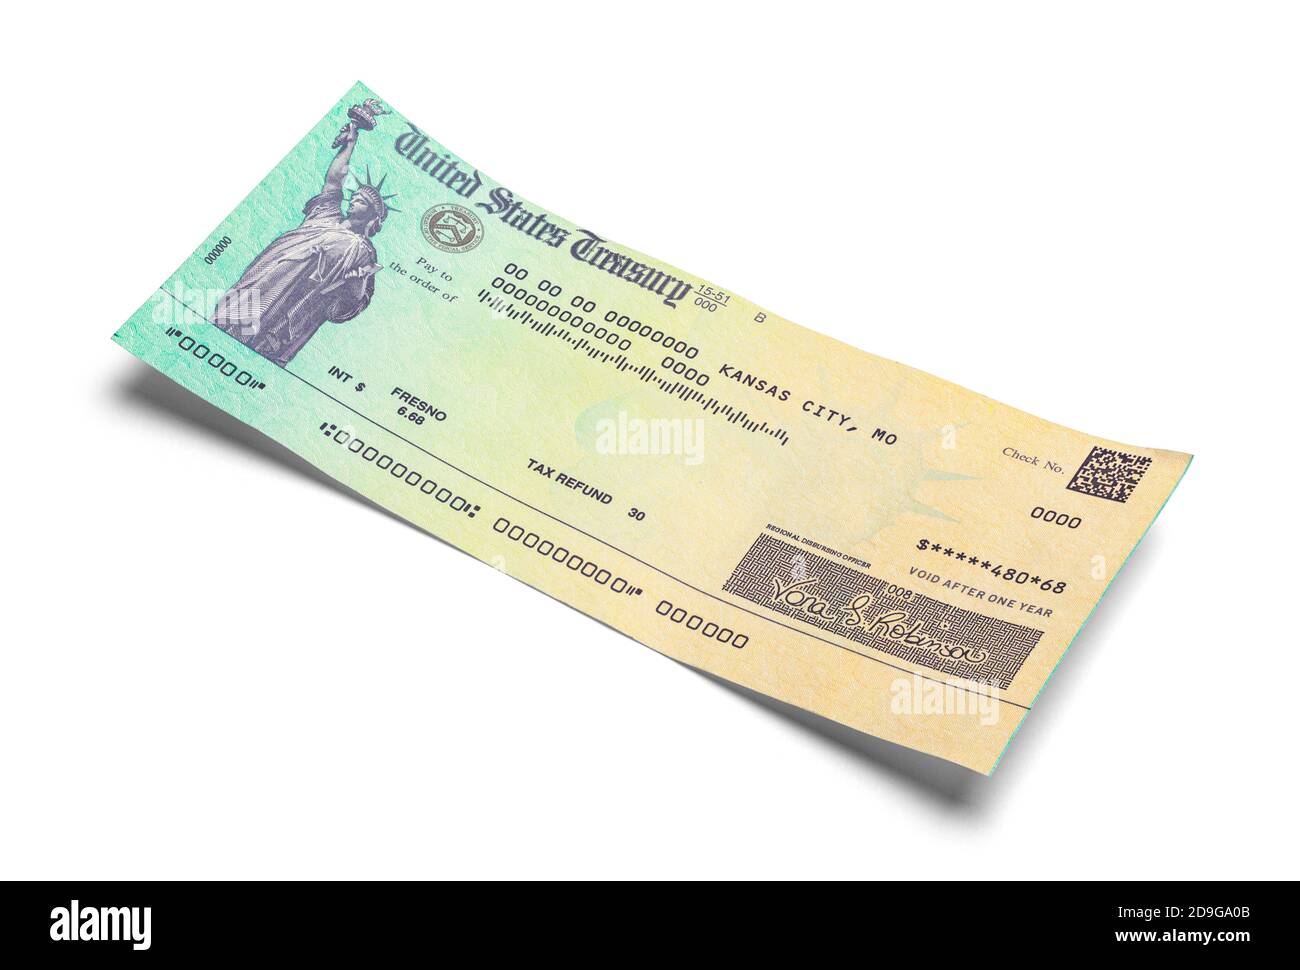 tax-refund-check-with-copy-space-cut-out-on-white-stock-photo-alamy